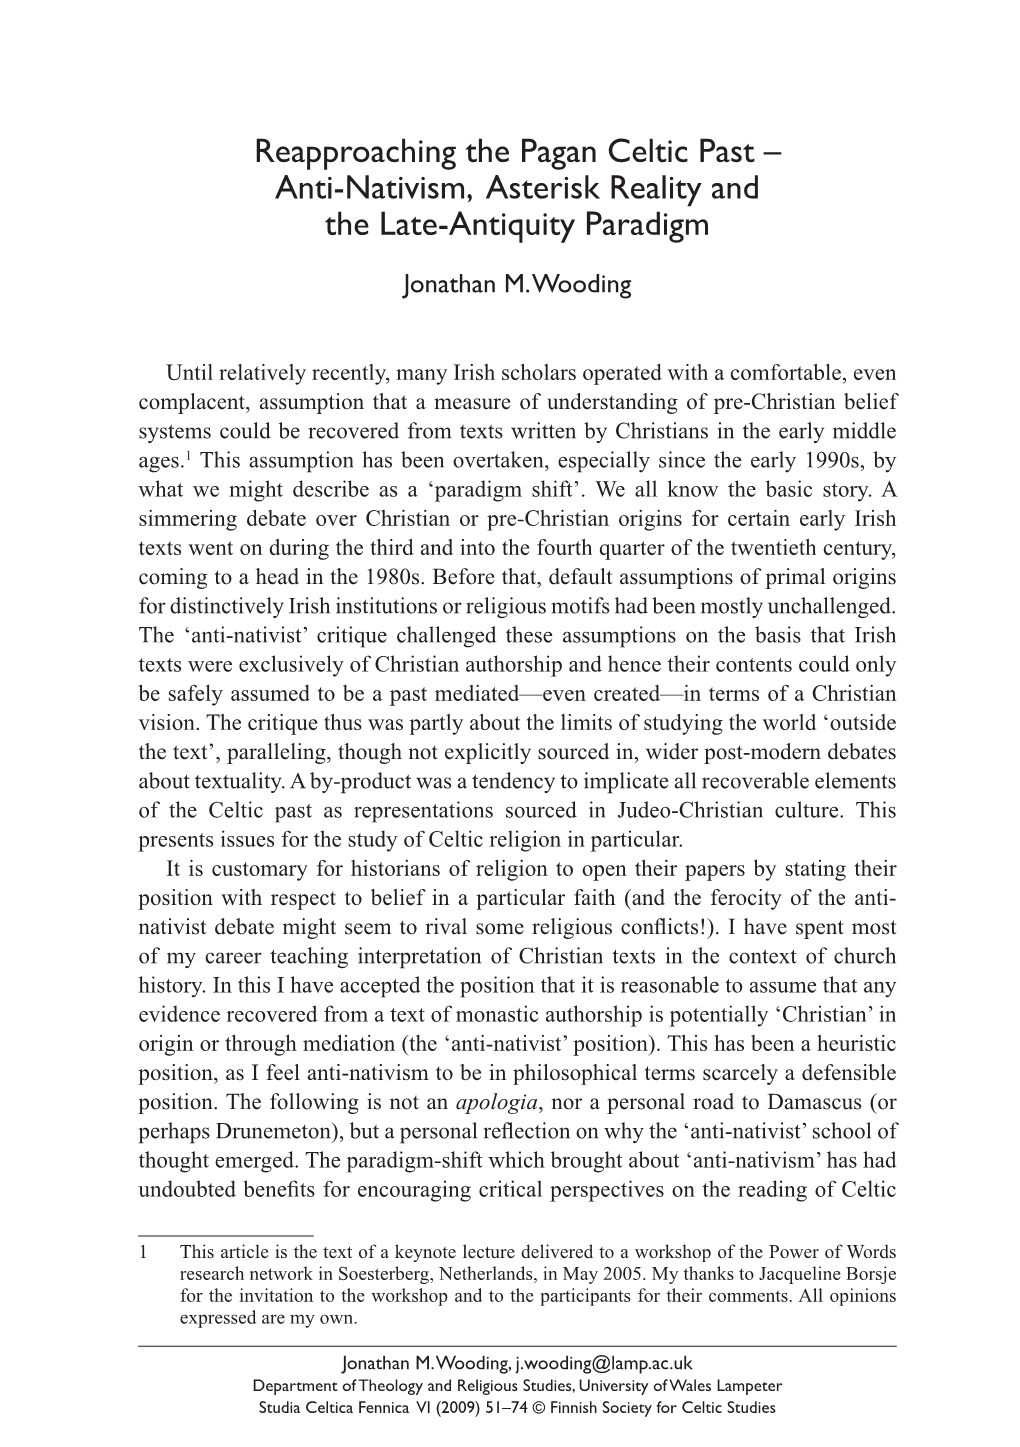 Reapproaching the Pagan Celtic Past – Anti-Nativism, Asterisk Reality and the Late-Antiquity Paradigm